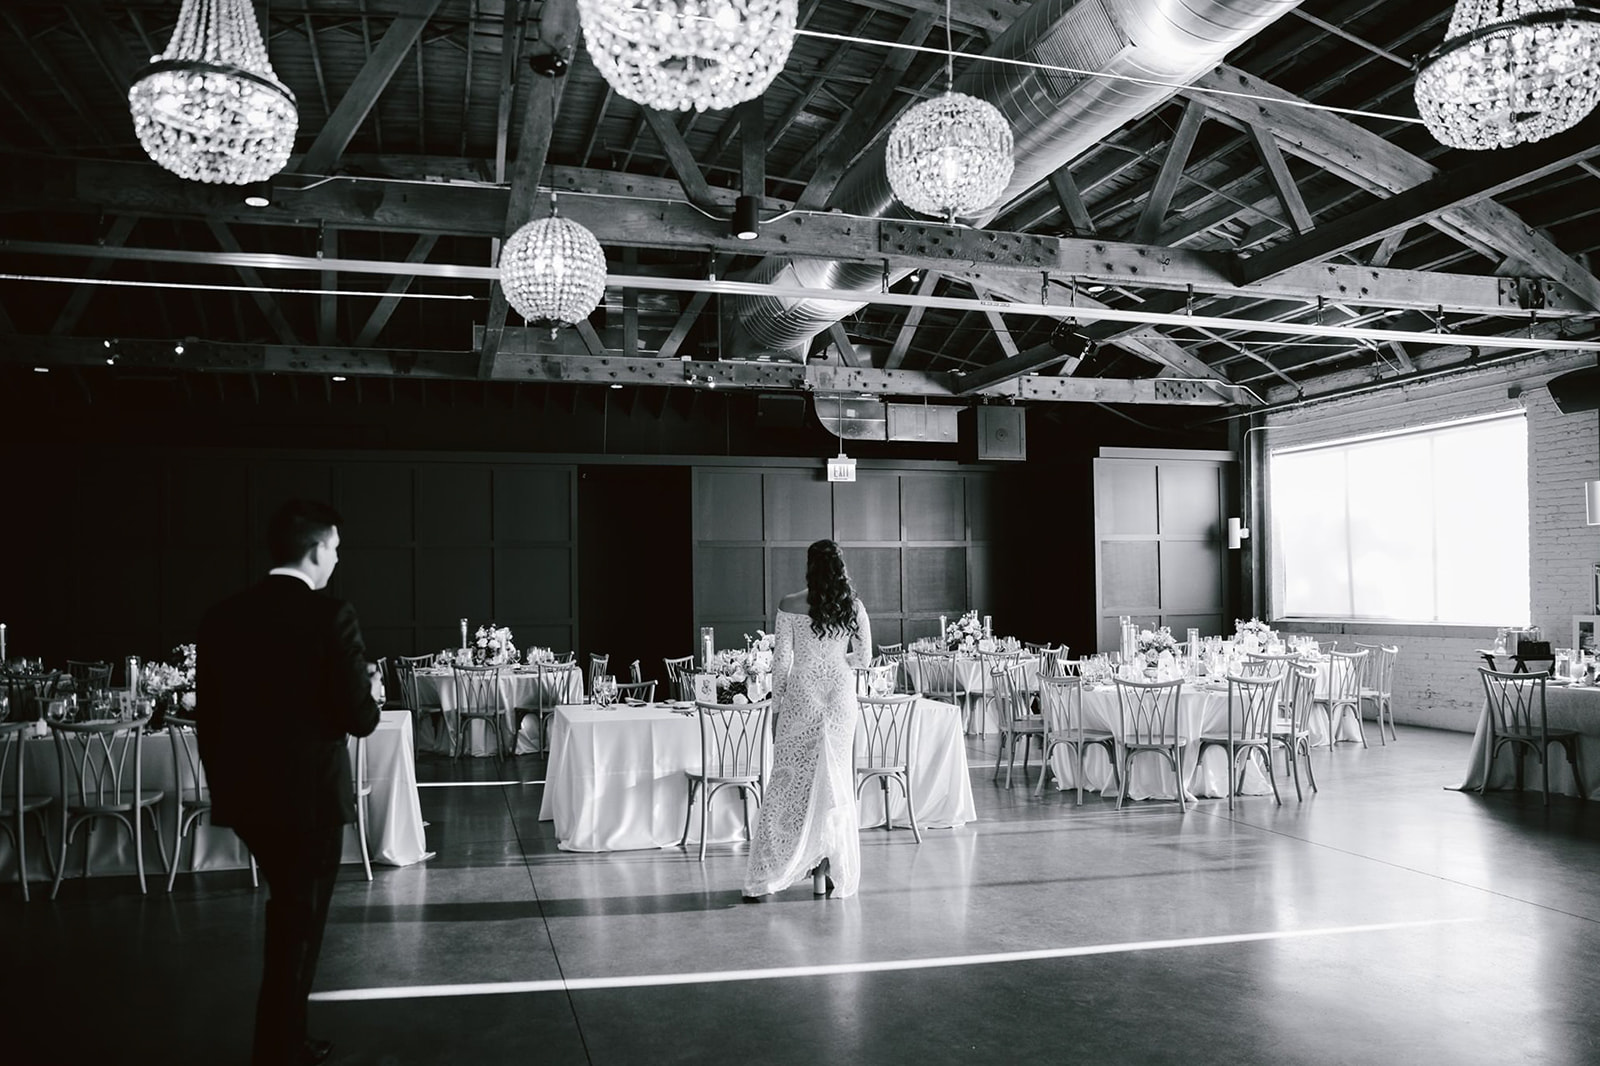 The bride and groom share a delighted reaction upon seeing their reception space at Walden Chicago.